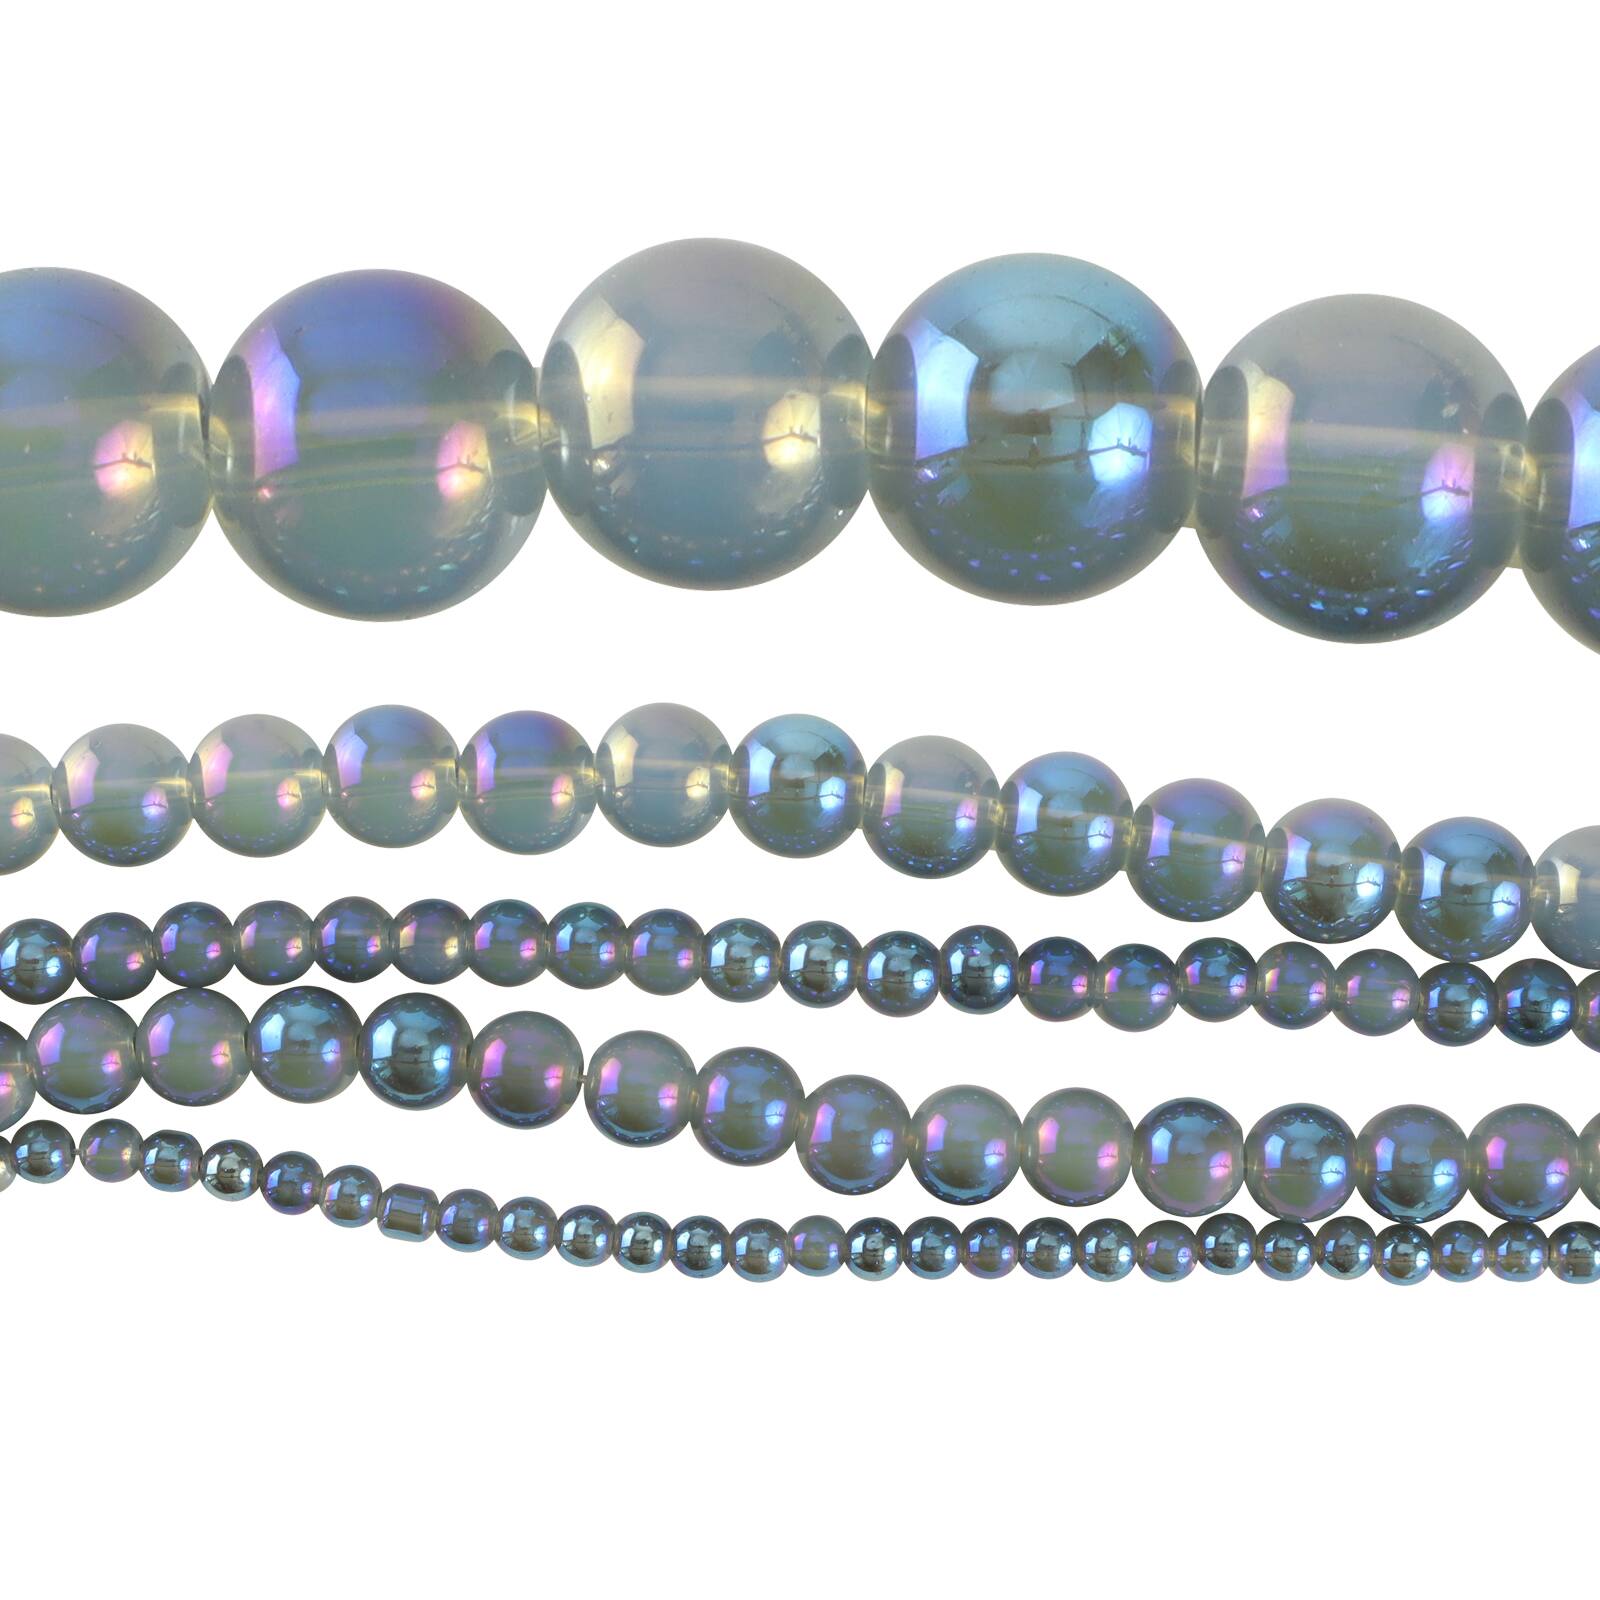 11 Color Glass Pearl Round Spacer Beads jewelry making 4mm/220 6mm/140 8mm/50 